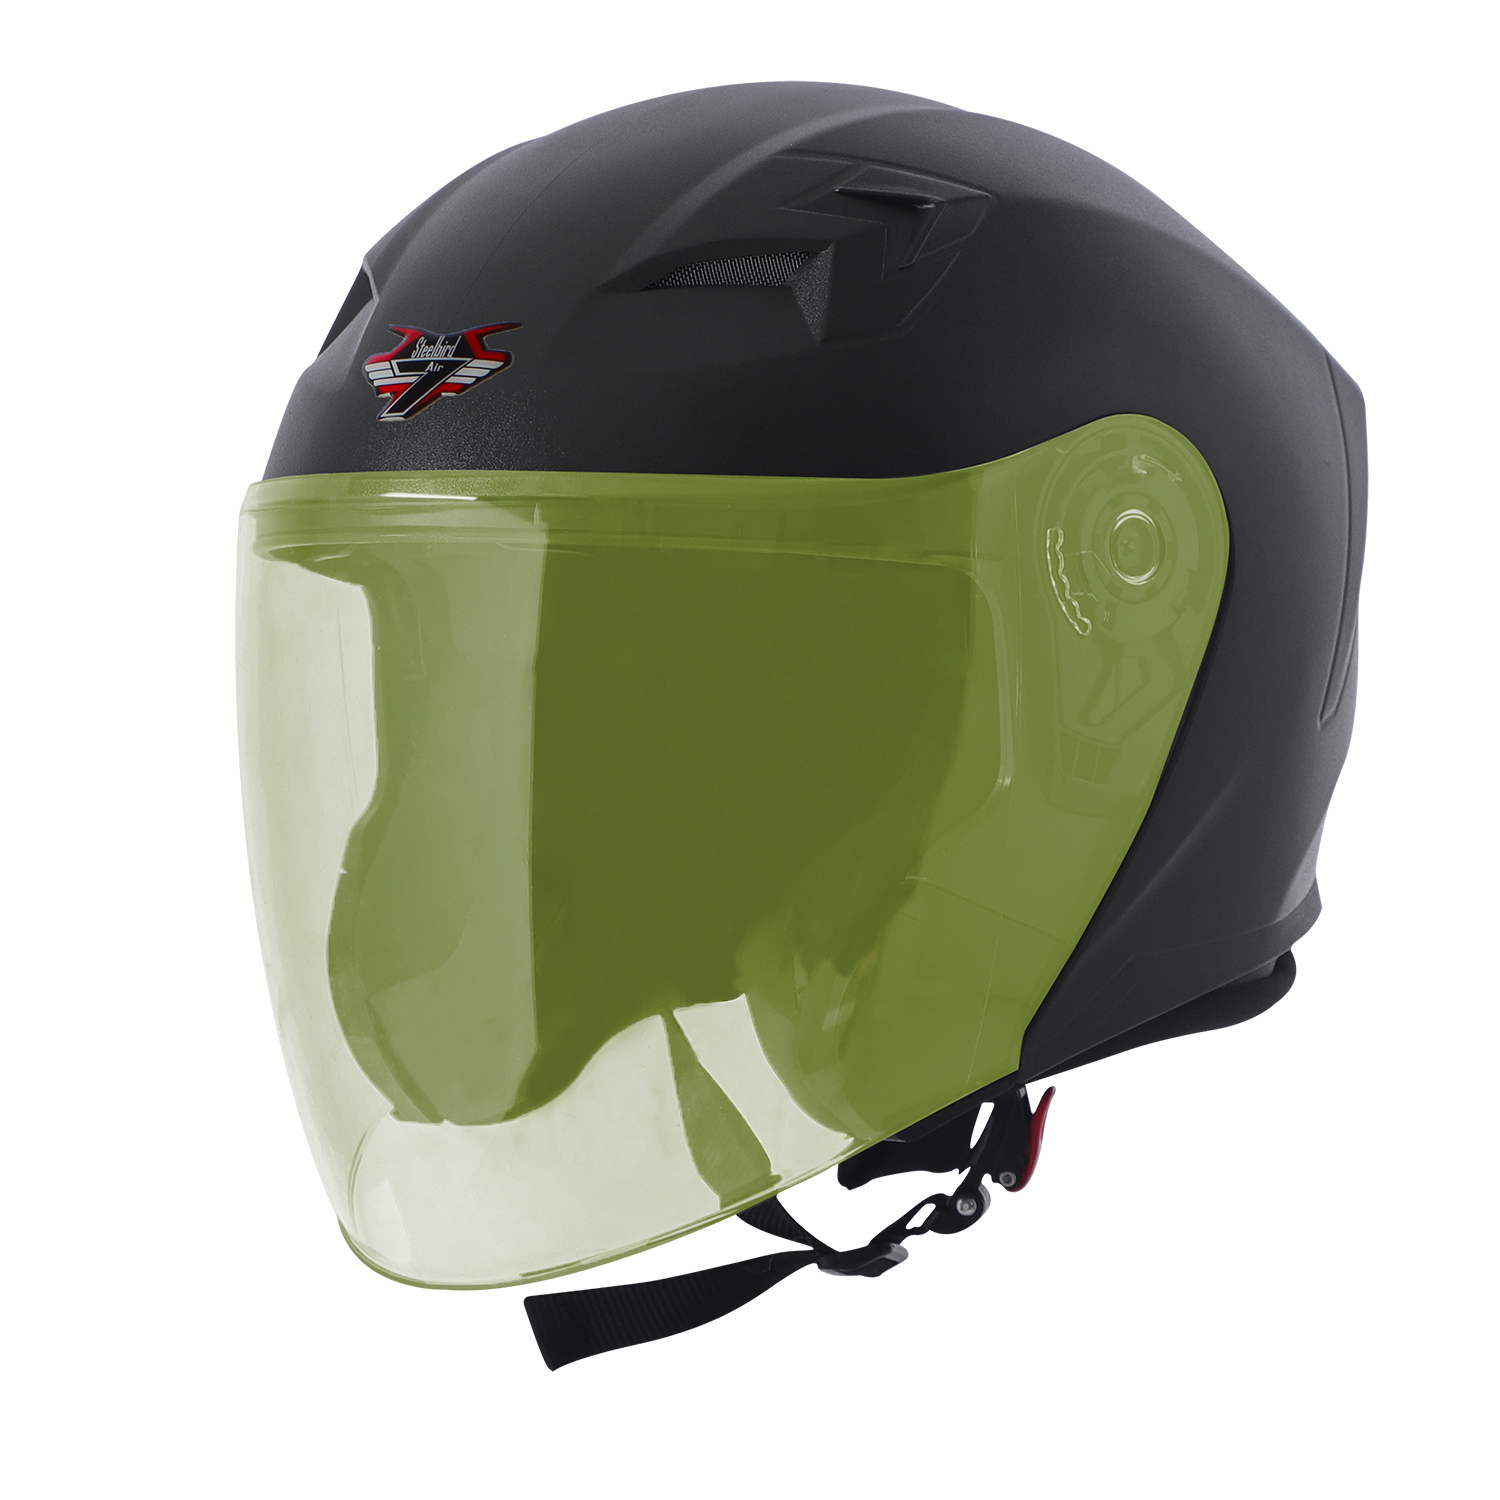 Steelbird SBA-17 7Wings ISI Certified Open Face Helmet For Men And Women (Dashing Black With Tinted Yellow Visor)